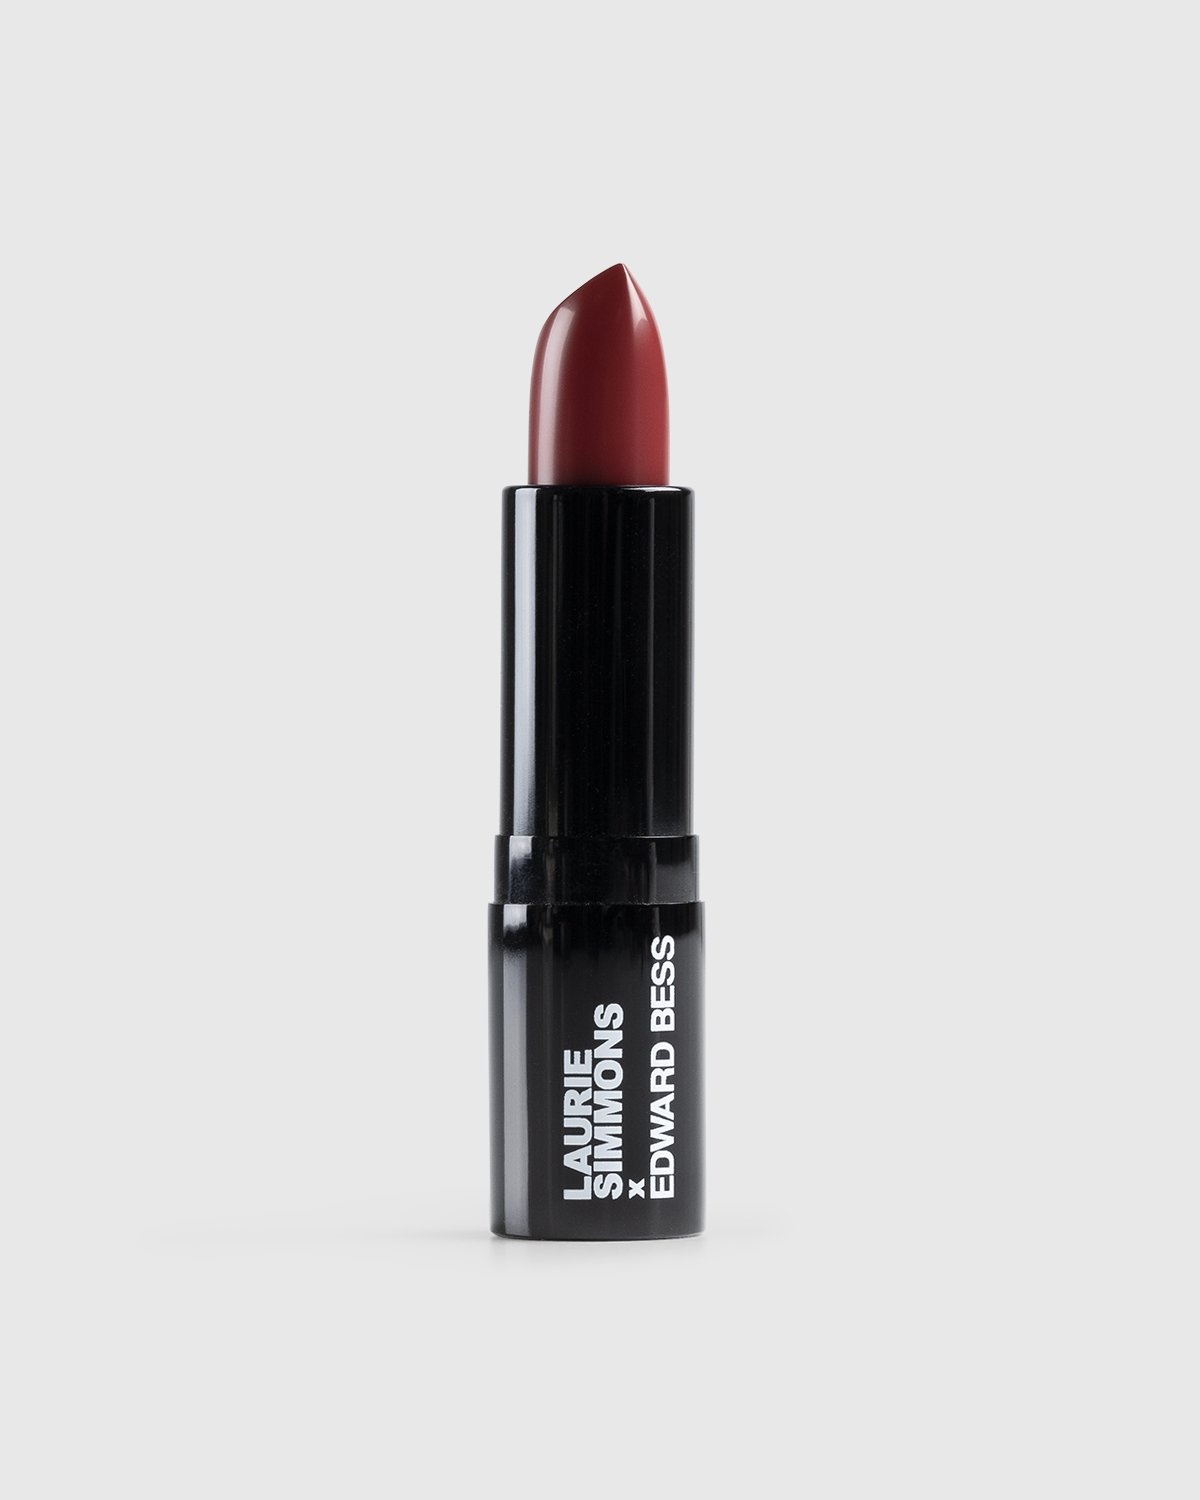 Laurie Simmons x Edward Bess x Highsnobiety – Lipstick - Makeup - Red - Image 1